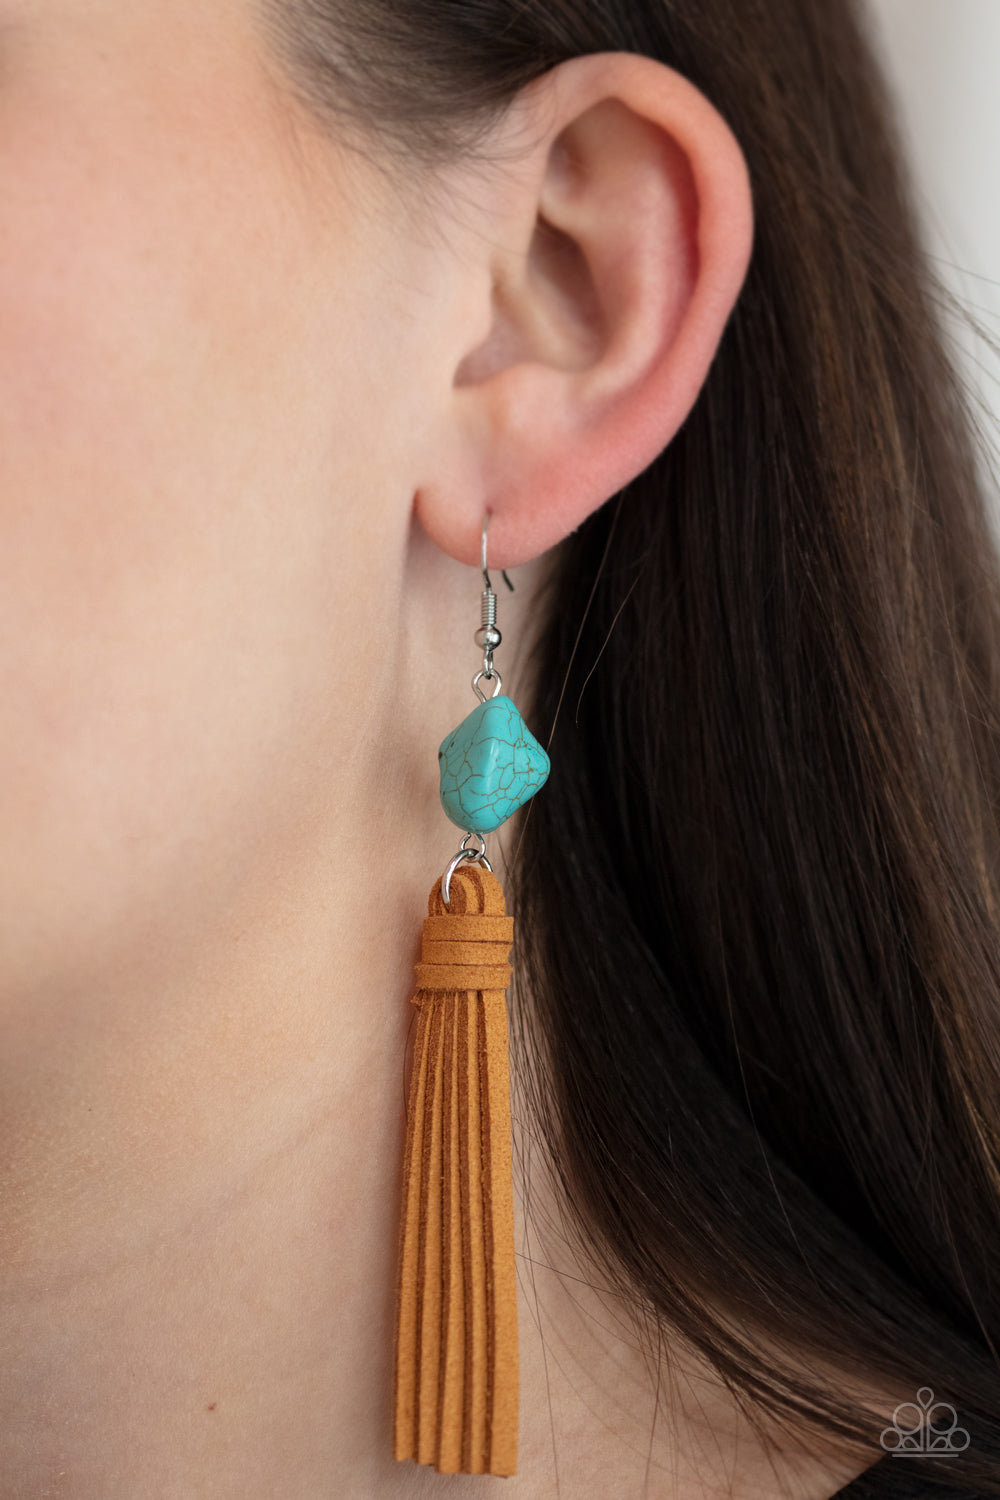 All-Natural Allure - Blue Earrings 2569